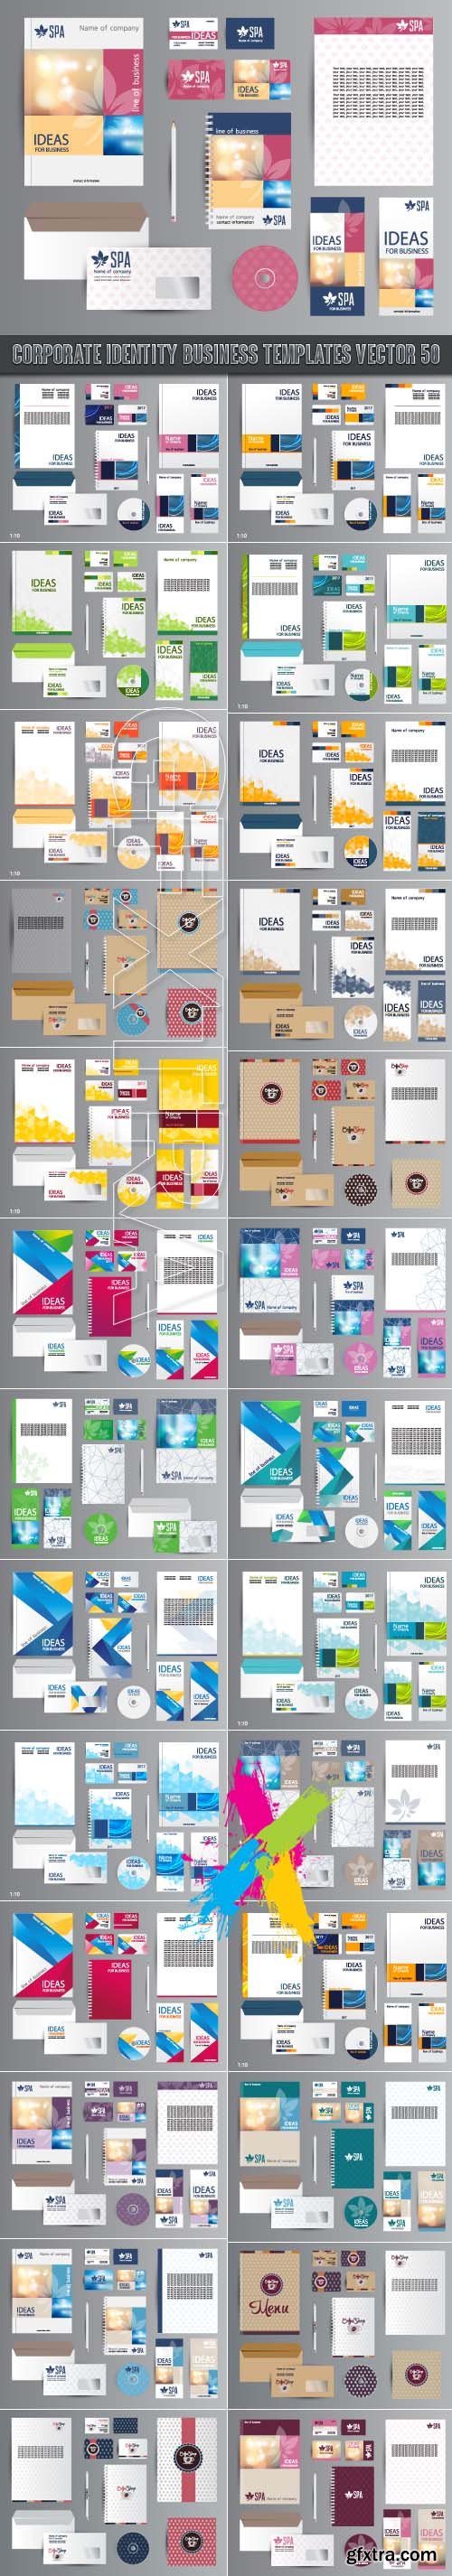 Corporate identity business templates vector 50